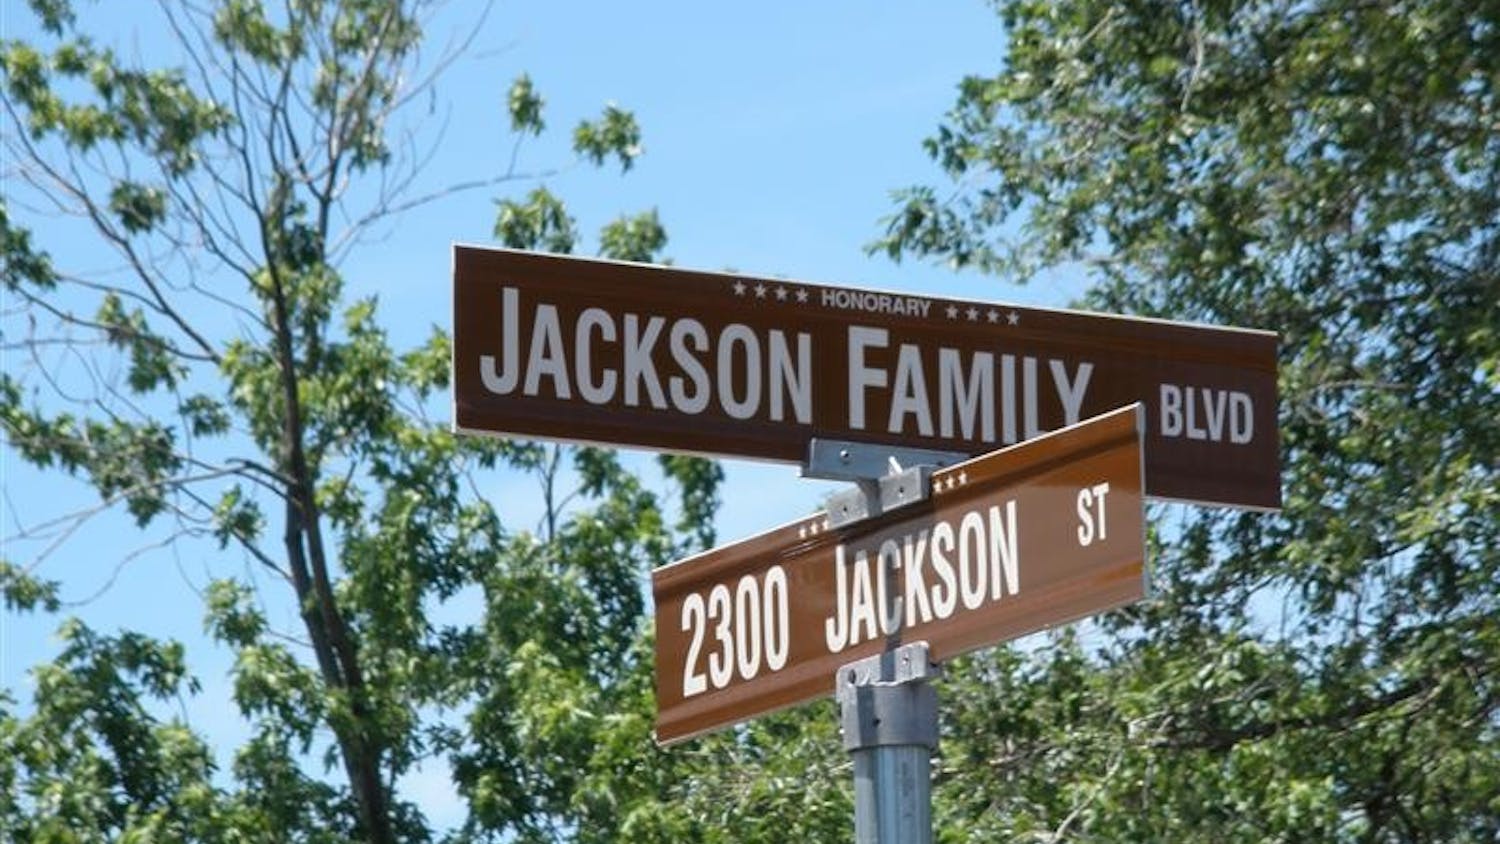 The sign marking the intersection of Jackson St. and 23rd Avenue, which was given the honorary name "Jackson Family Blvd" in July 2008.